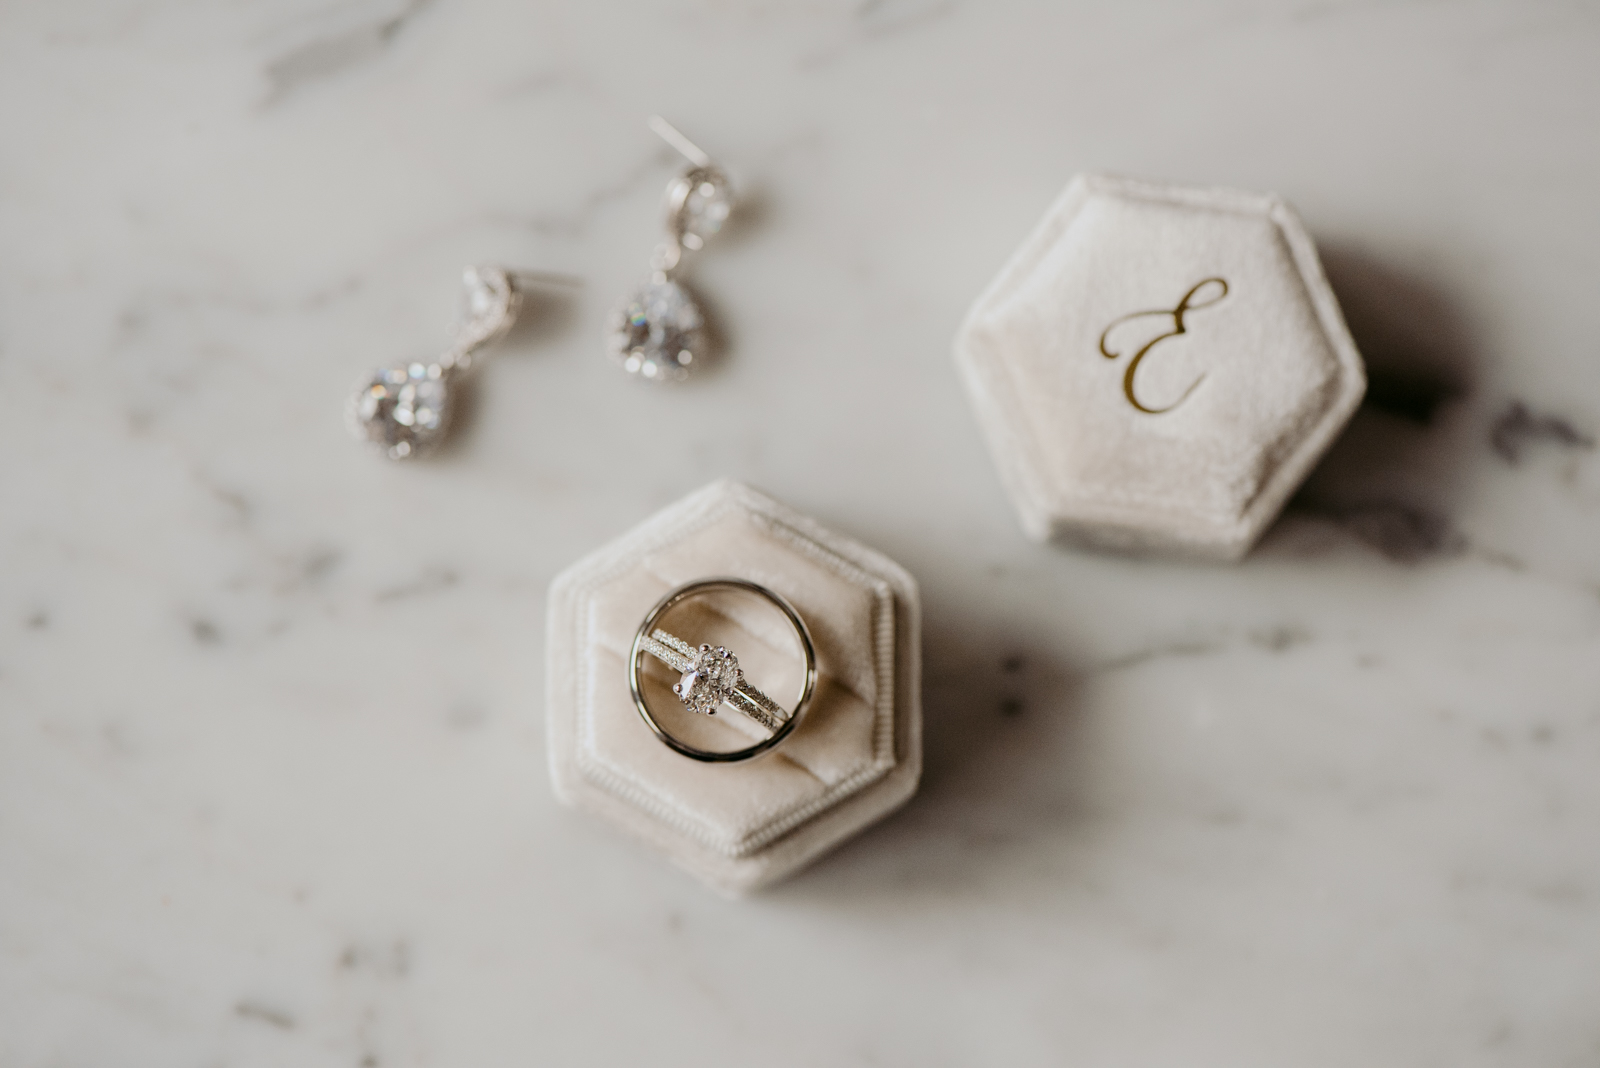 ring box and earrings on marble table